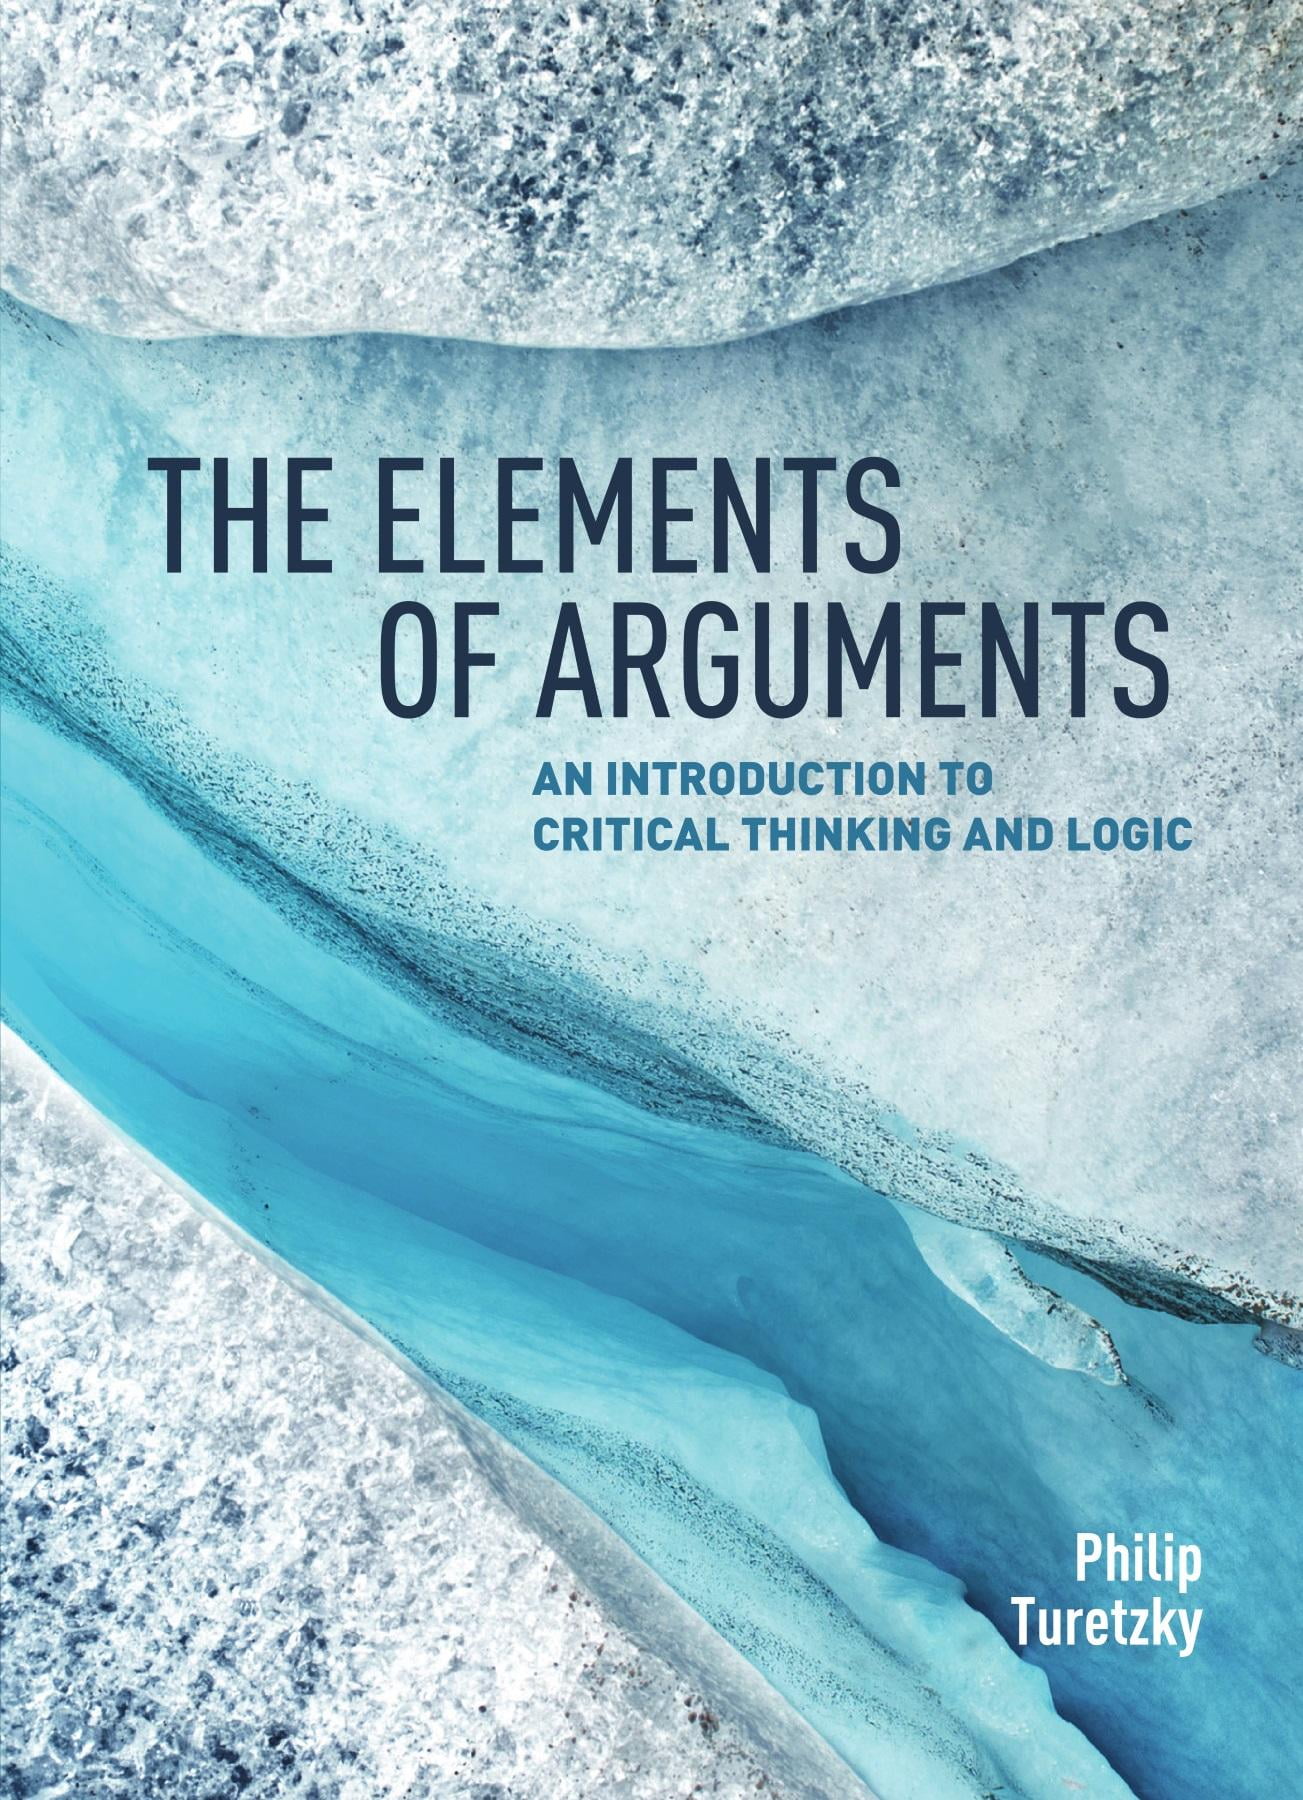 reconstructing arguments critical thinking